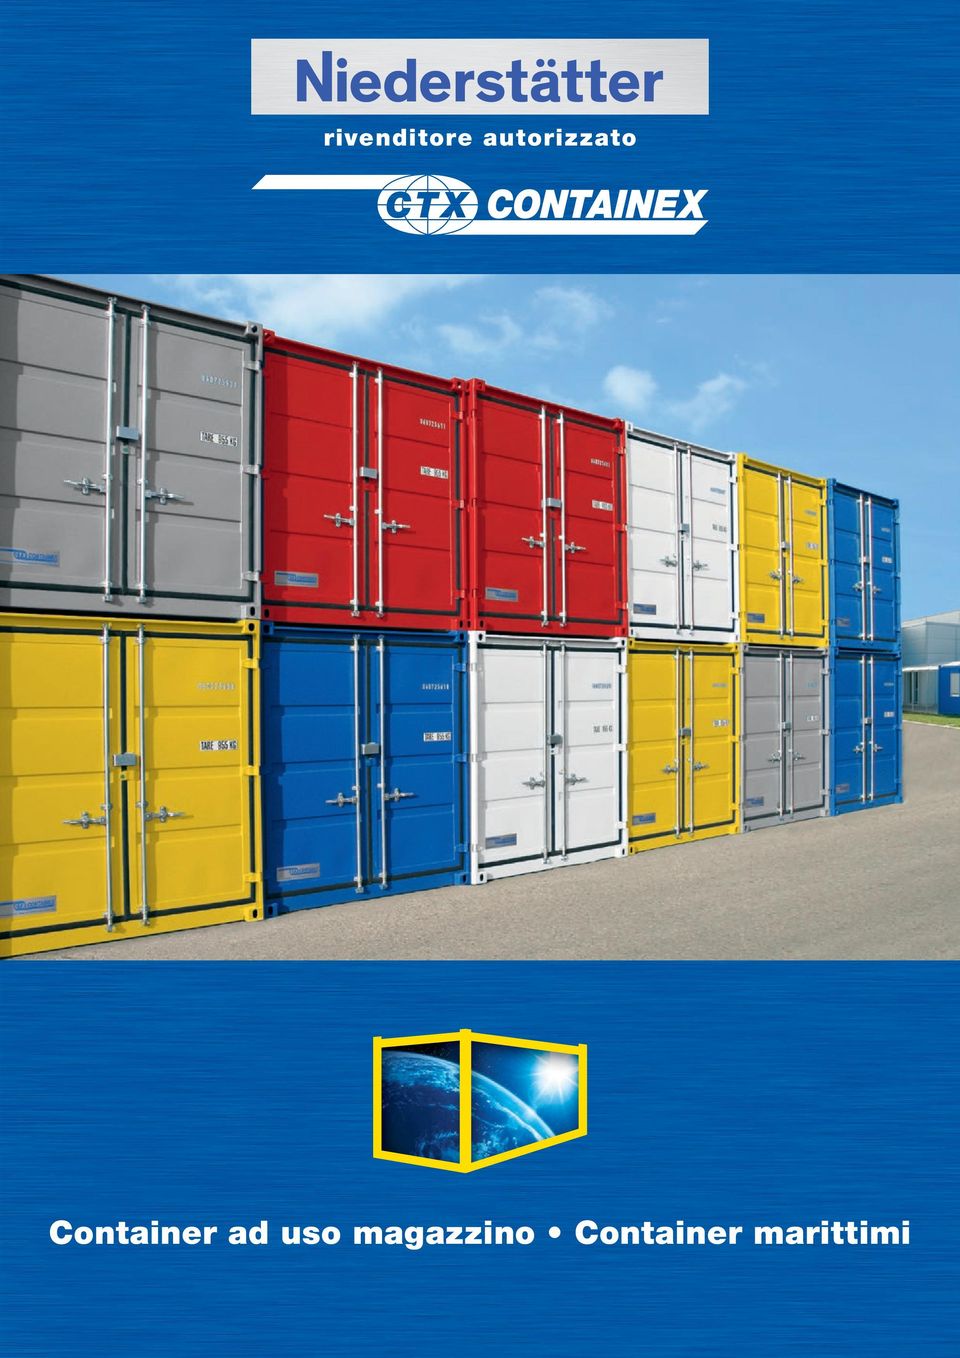 Container ad uso